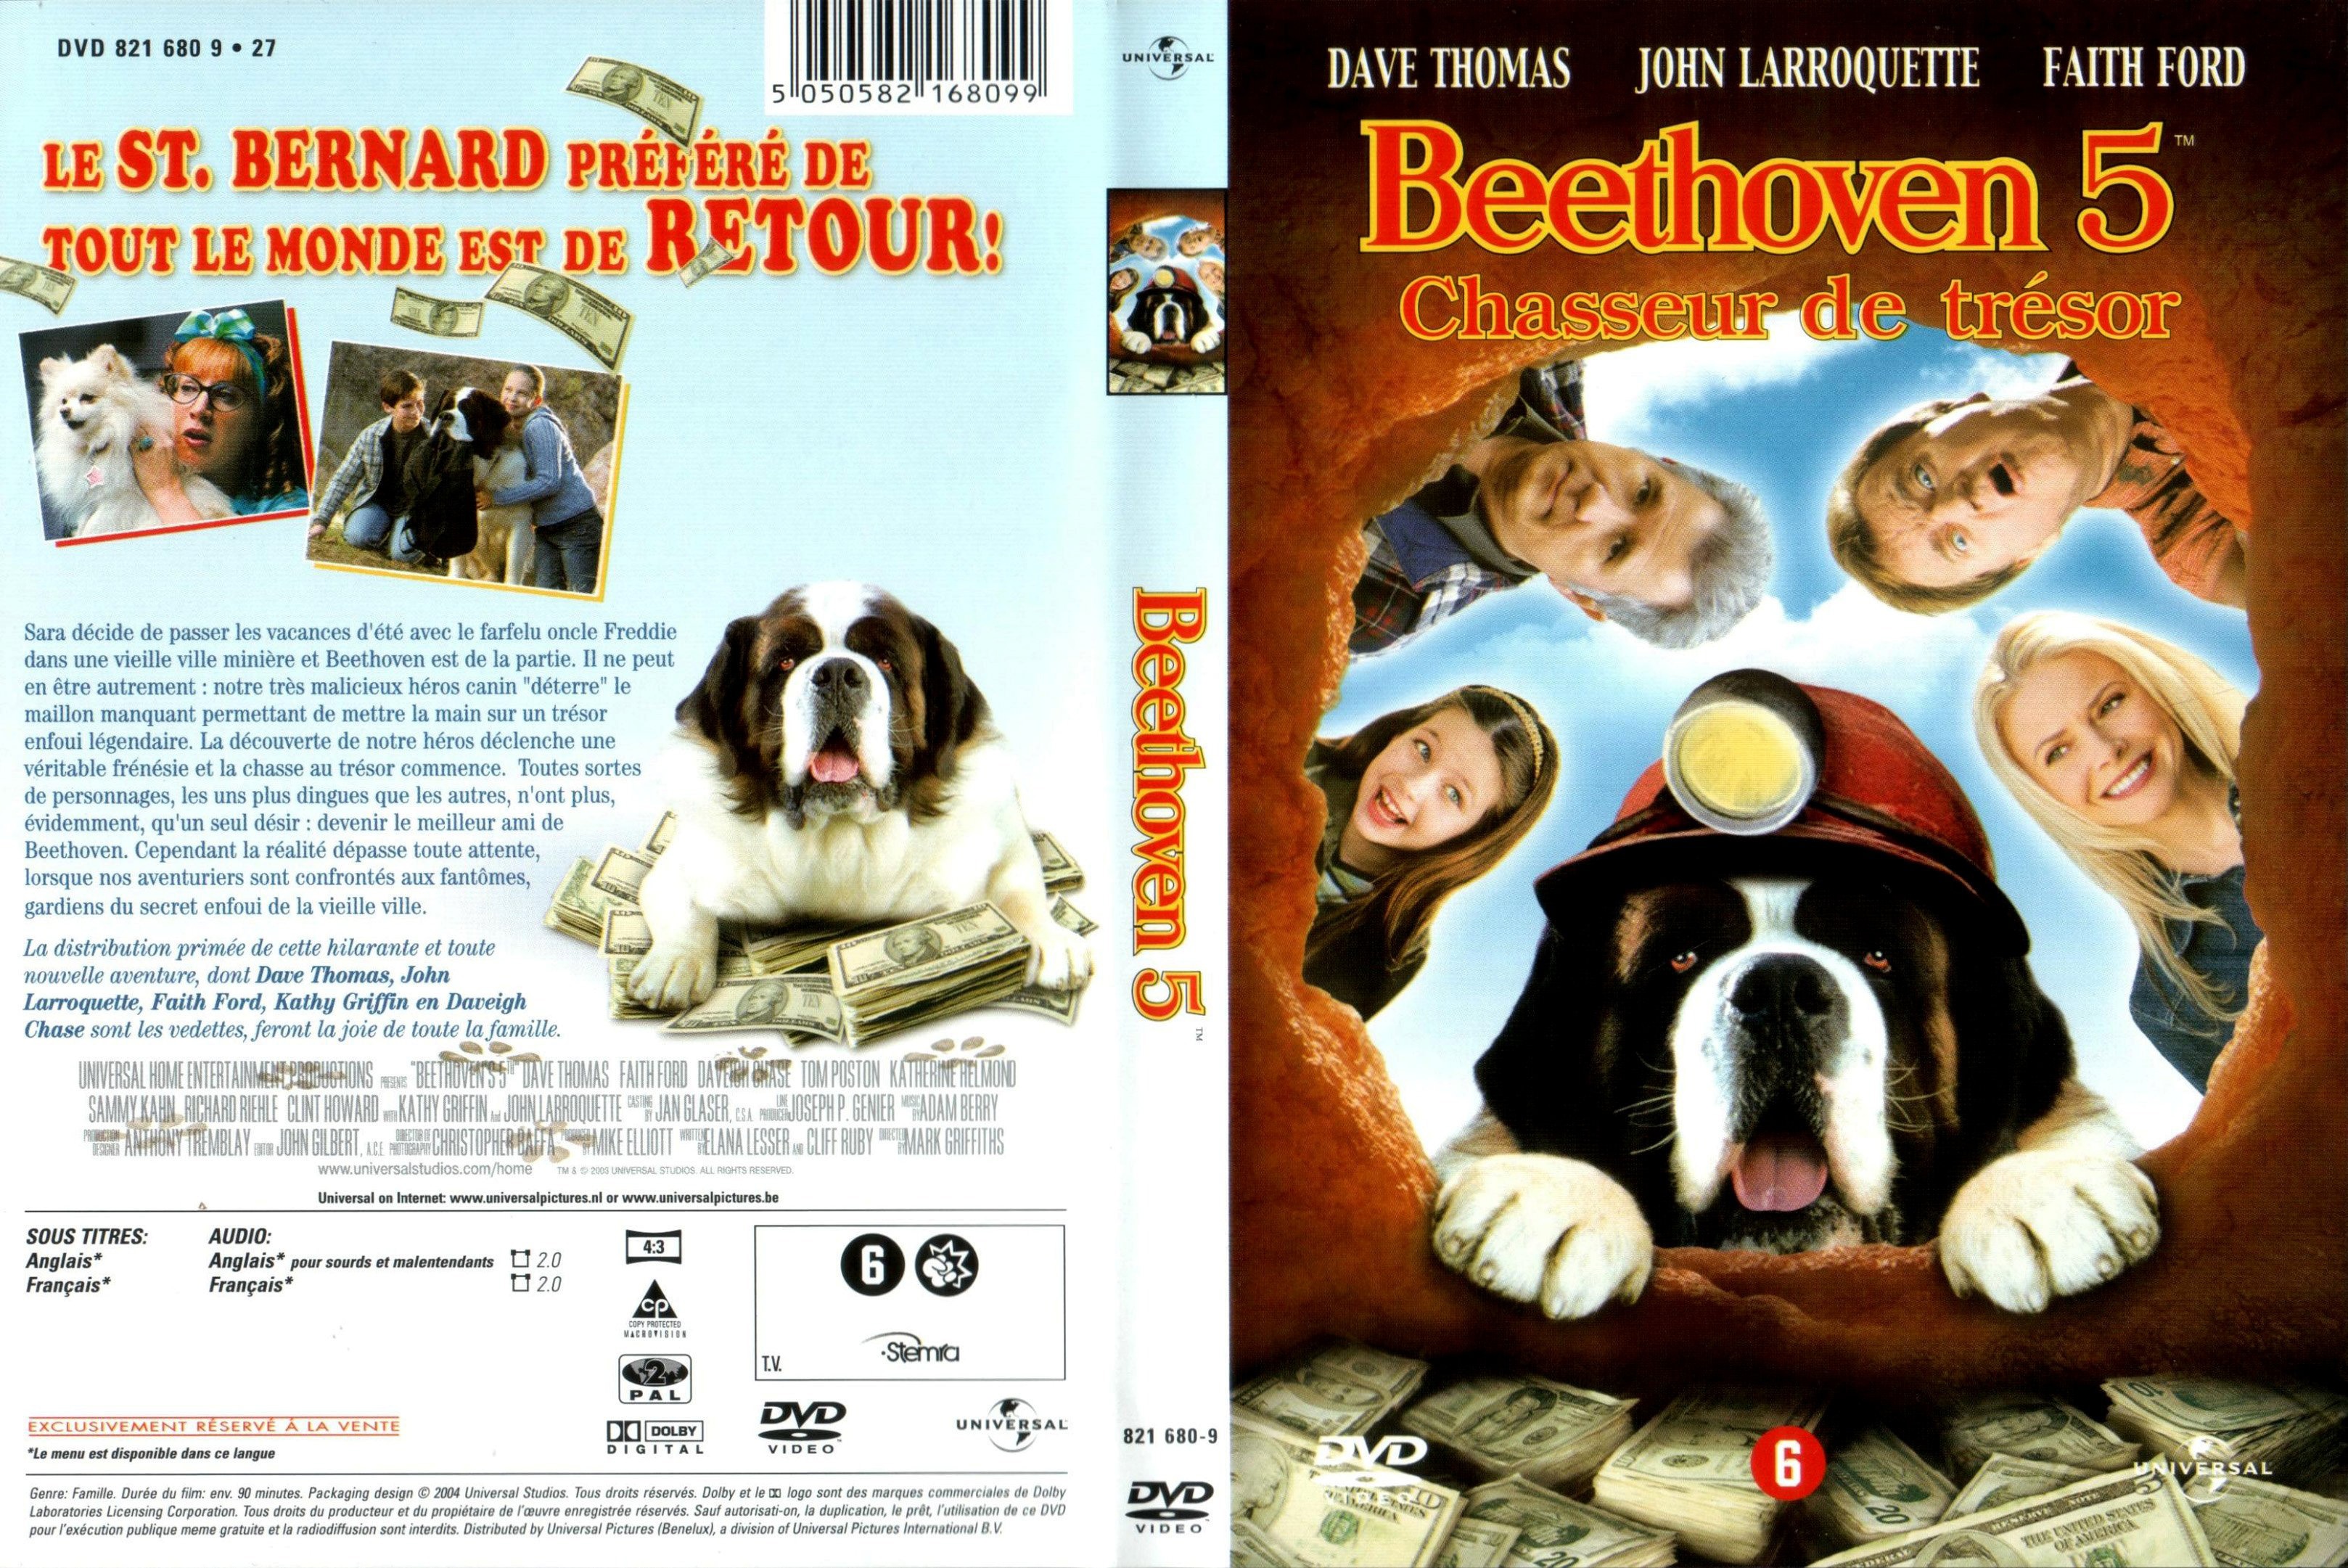 Jaquette DVD Beethoven 5